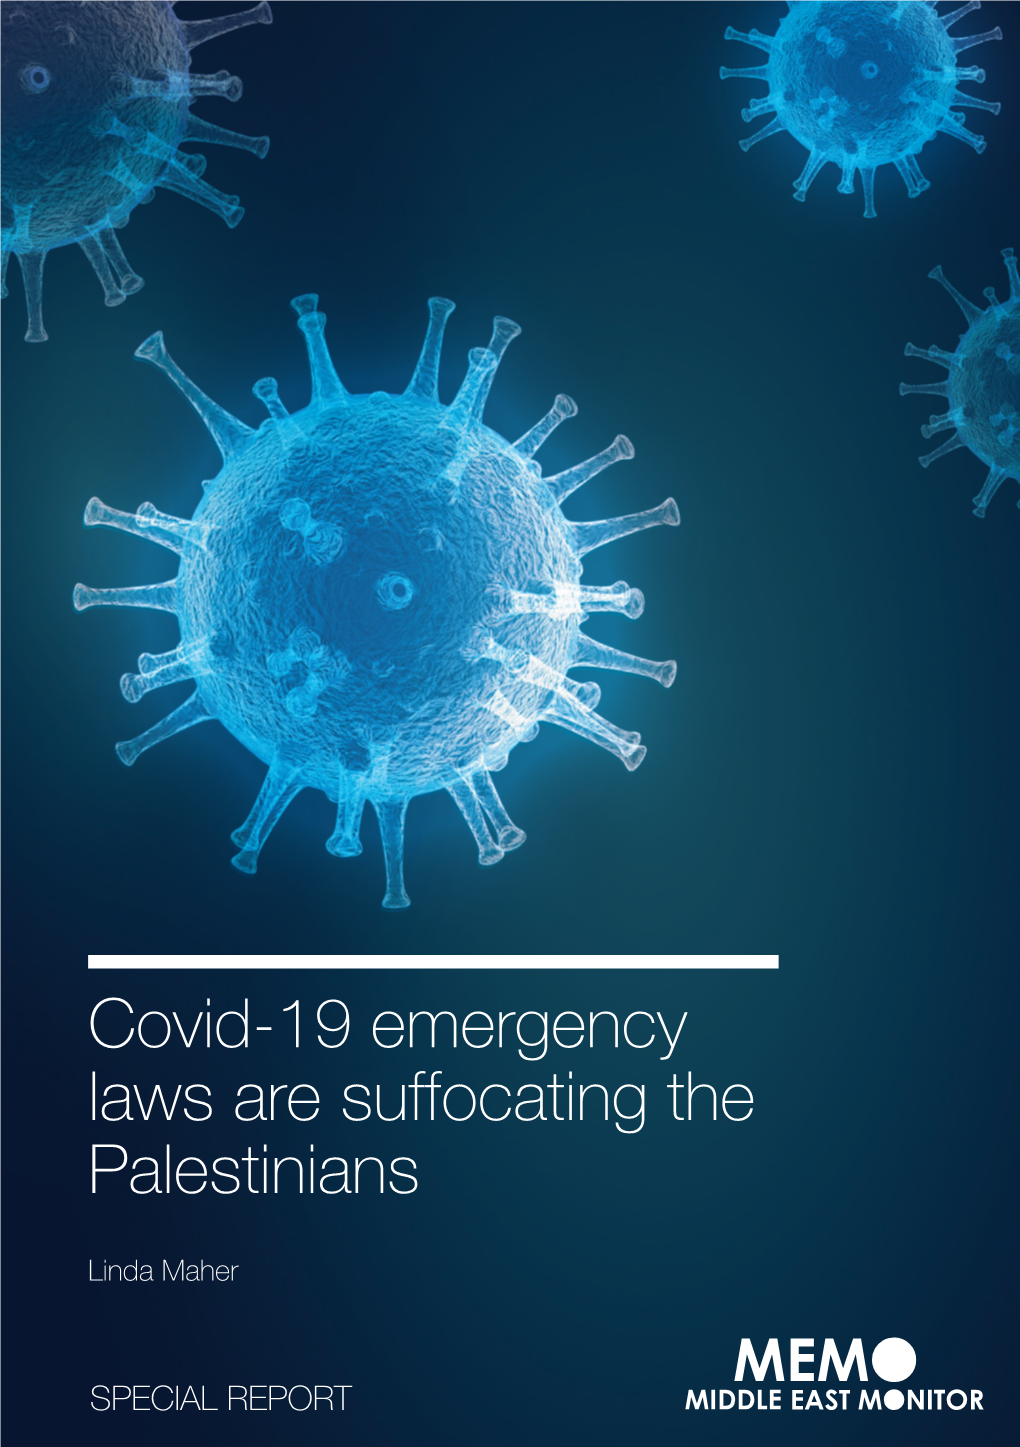 Covid-19 Emergency Laws Are Suffocating the Palestinians